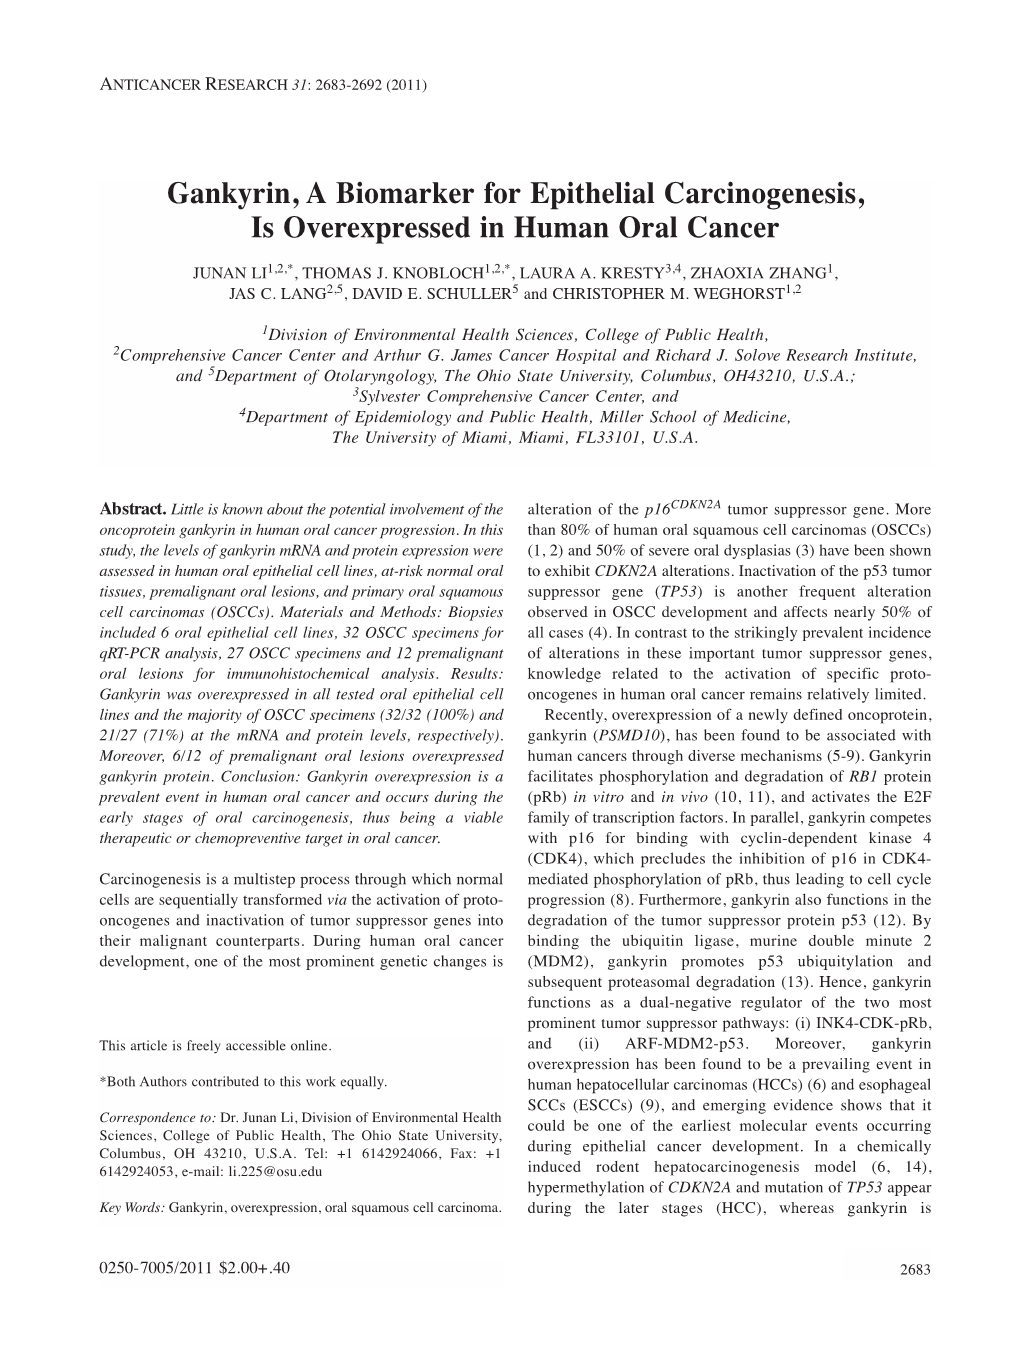 Gankyrin, a Biomarker for Epithelial Carcinogenesis, Is Overexpressed in Human Oral Cancer